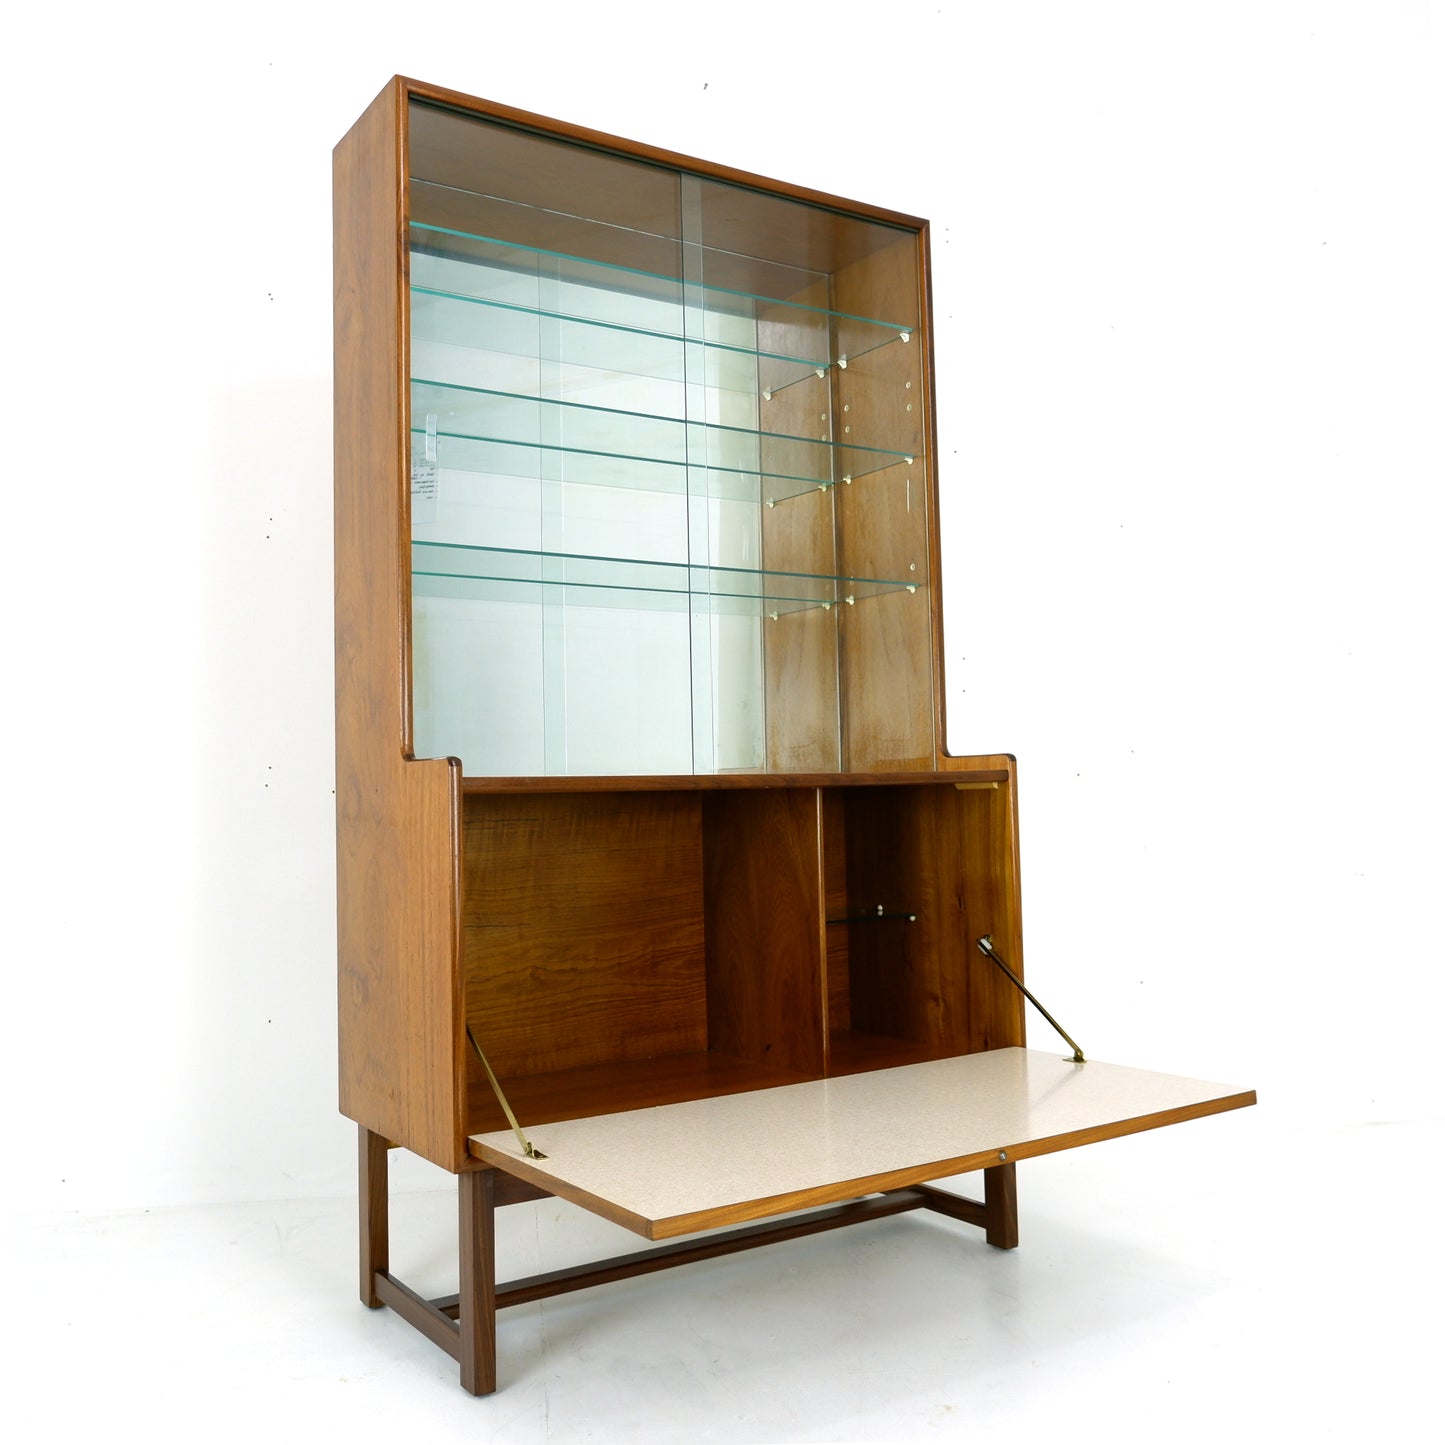 Turnidge of London Mirrored Cocktail/Drinks Cabinet in Teak and Glass - Mid Century Modern